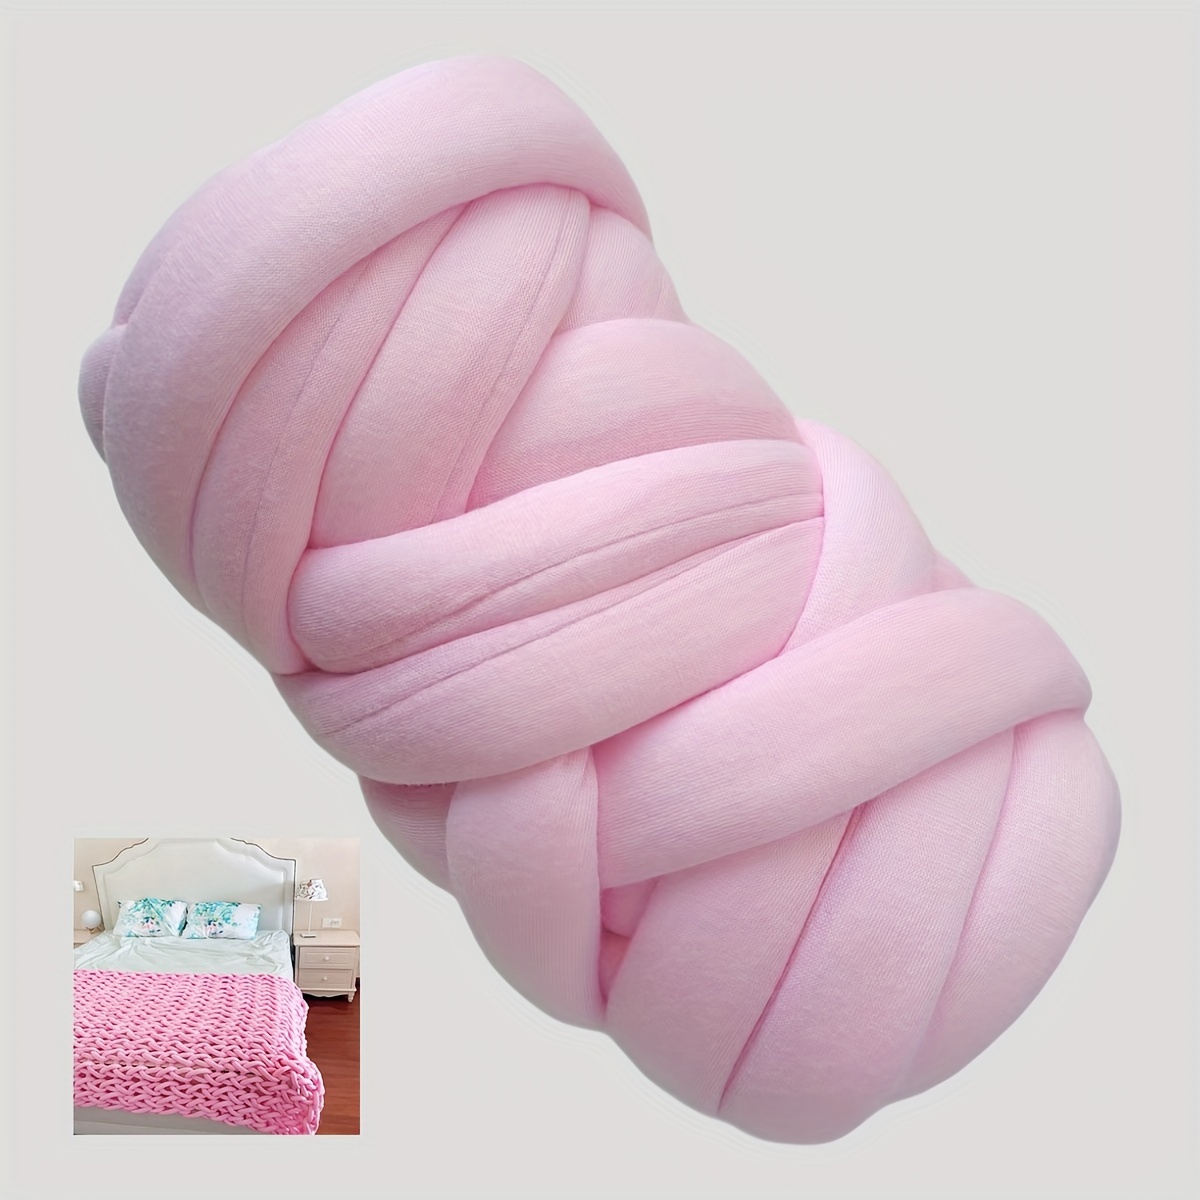 

Extra Thick Giant Polyester Yarn, 250g, Arm Knitting, Chunky Ribbed Ribbon Yarn For Diy Knitting And Crochet Blankets - Available In White, Red, Beige, Bright Pink, Yellow, Blue